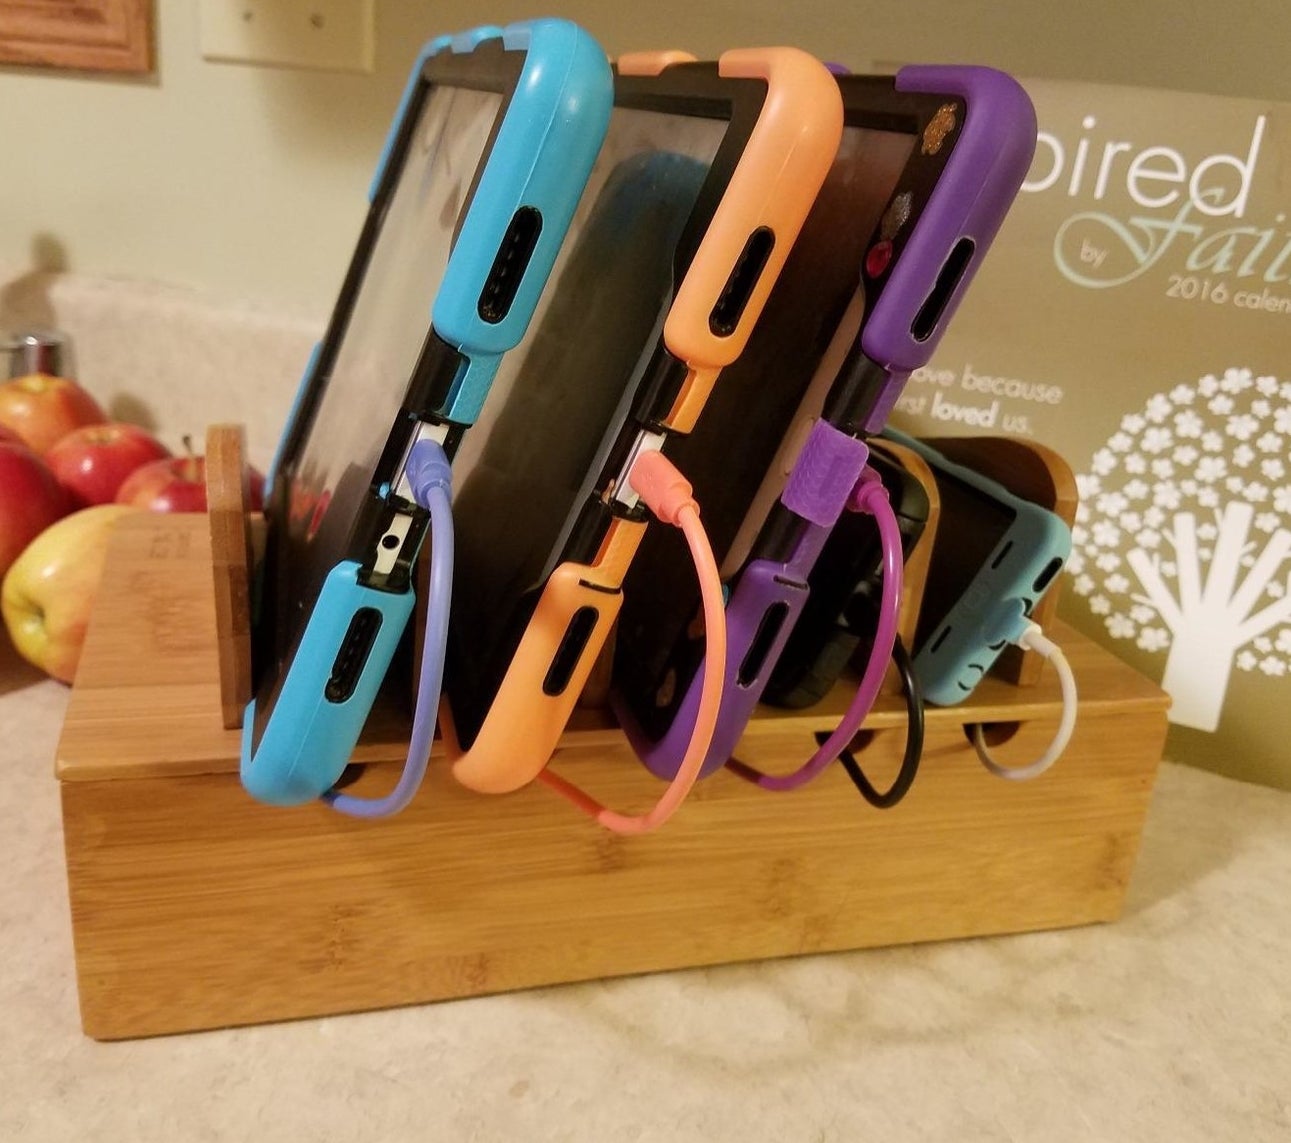 reviewer photo of the wooden charging station holding four devices